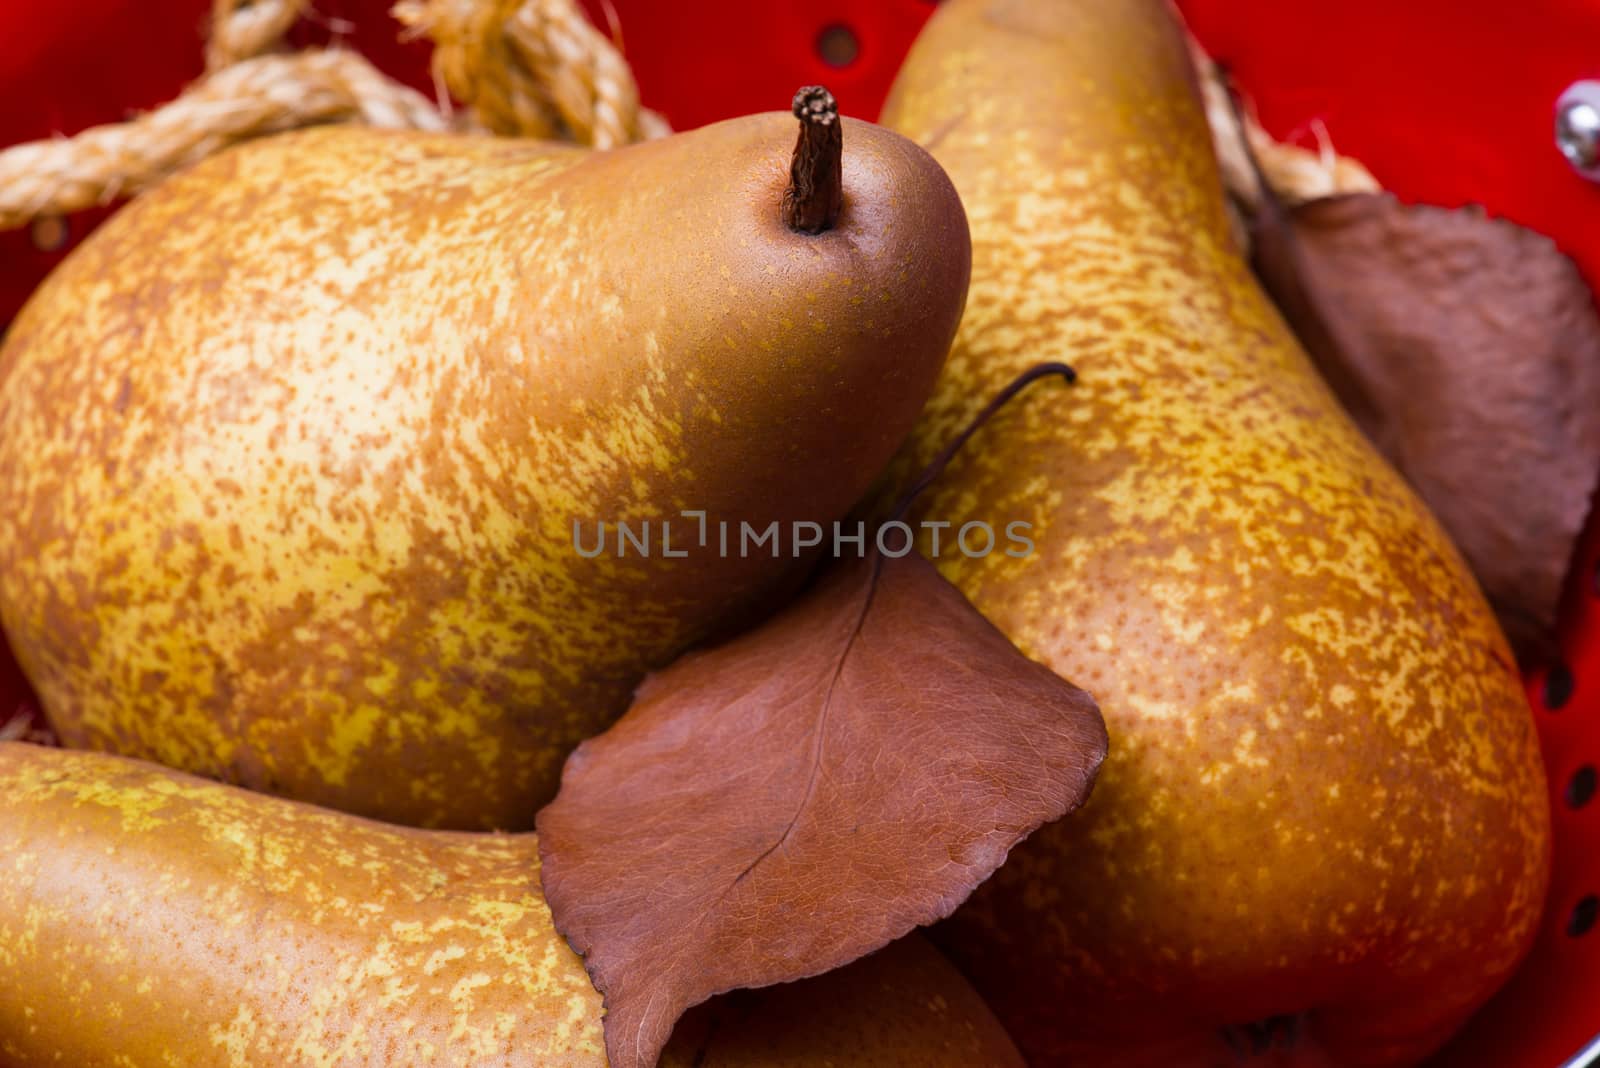 Two pears on a red colander with brown color wood background and ropes